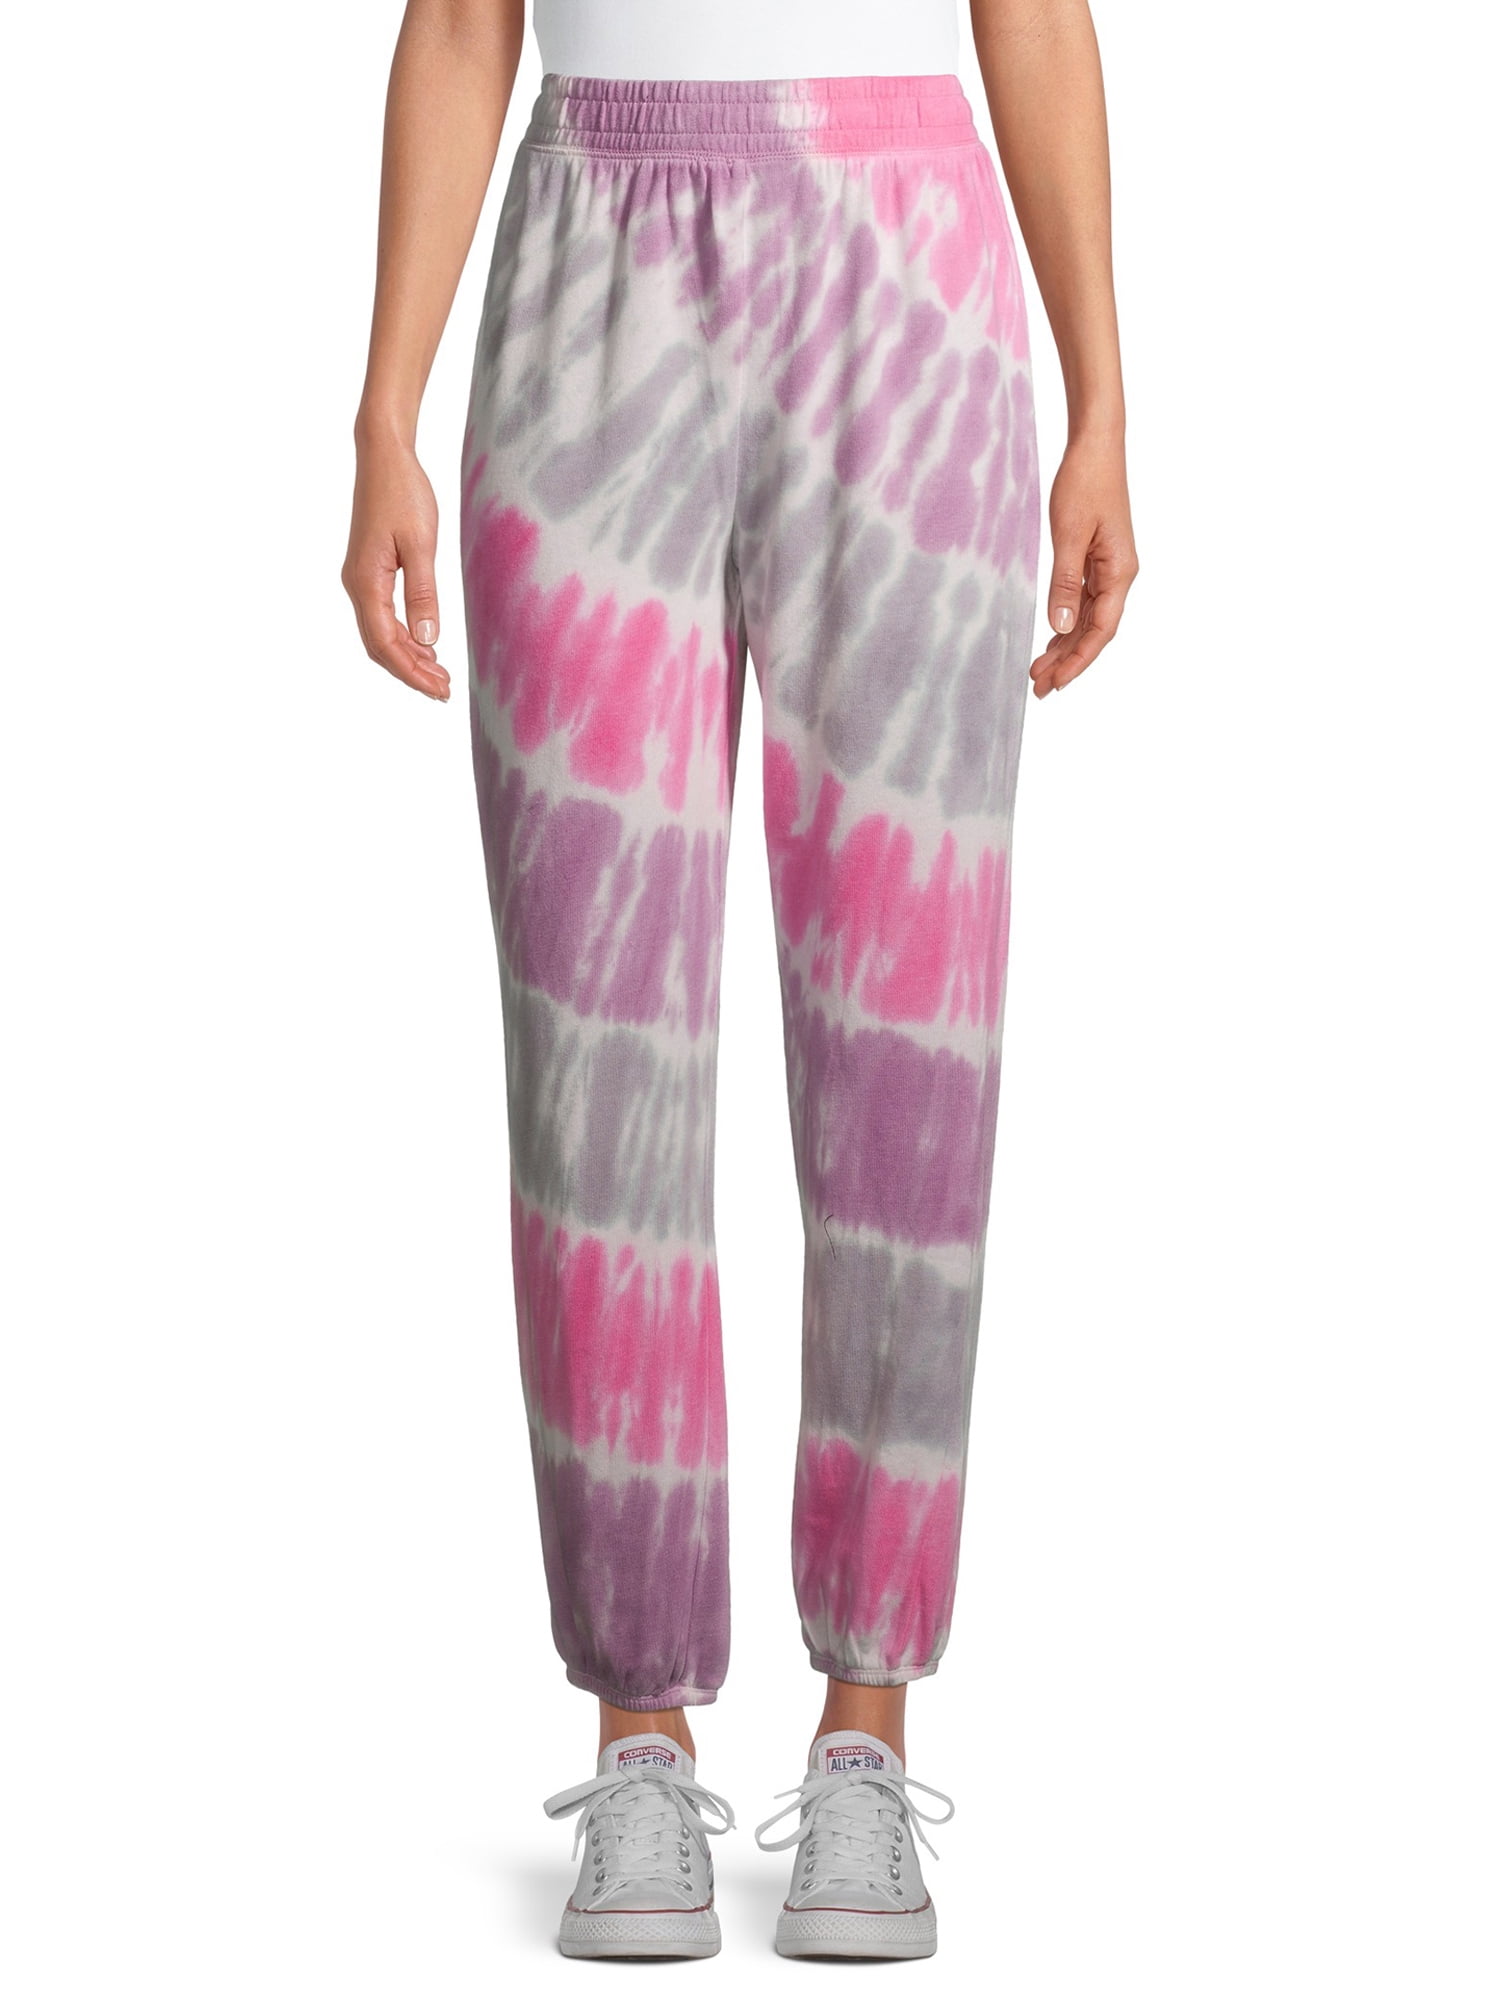 BTween Girl's 3-Pack Velour Jogger Pant Set - Solid and Tie Dye Sweatpants  for Girls, Black/Pink Size 10/12 